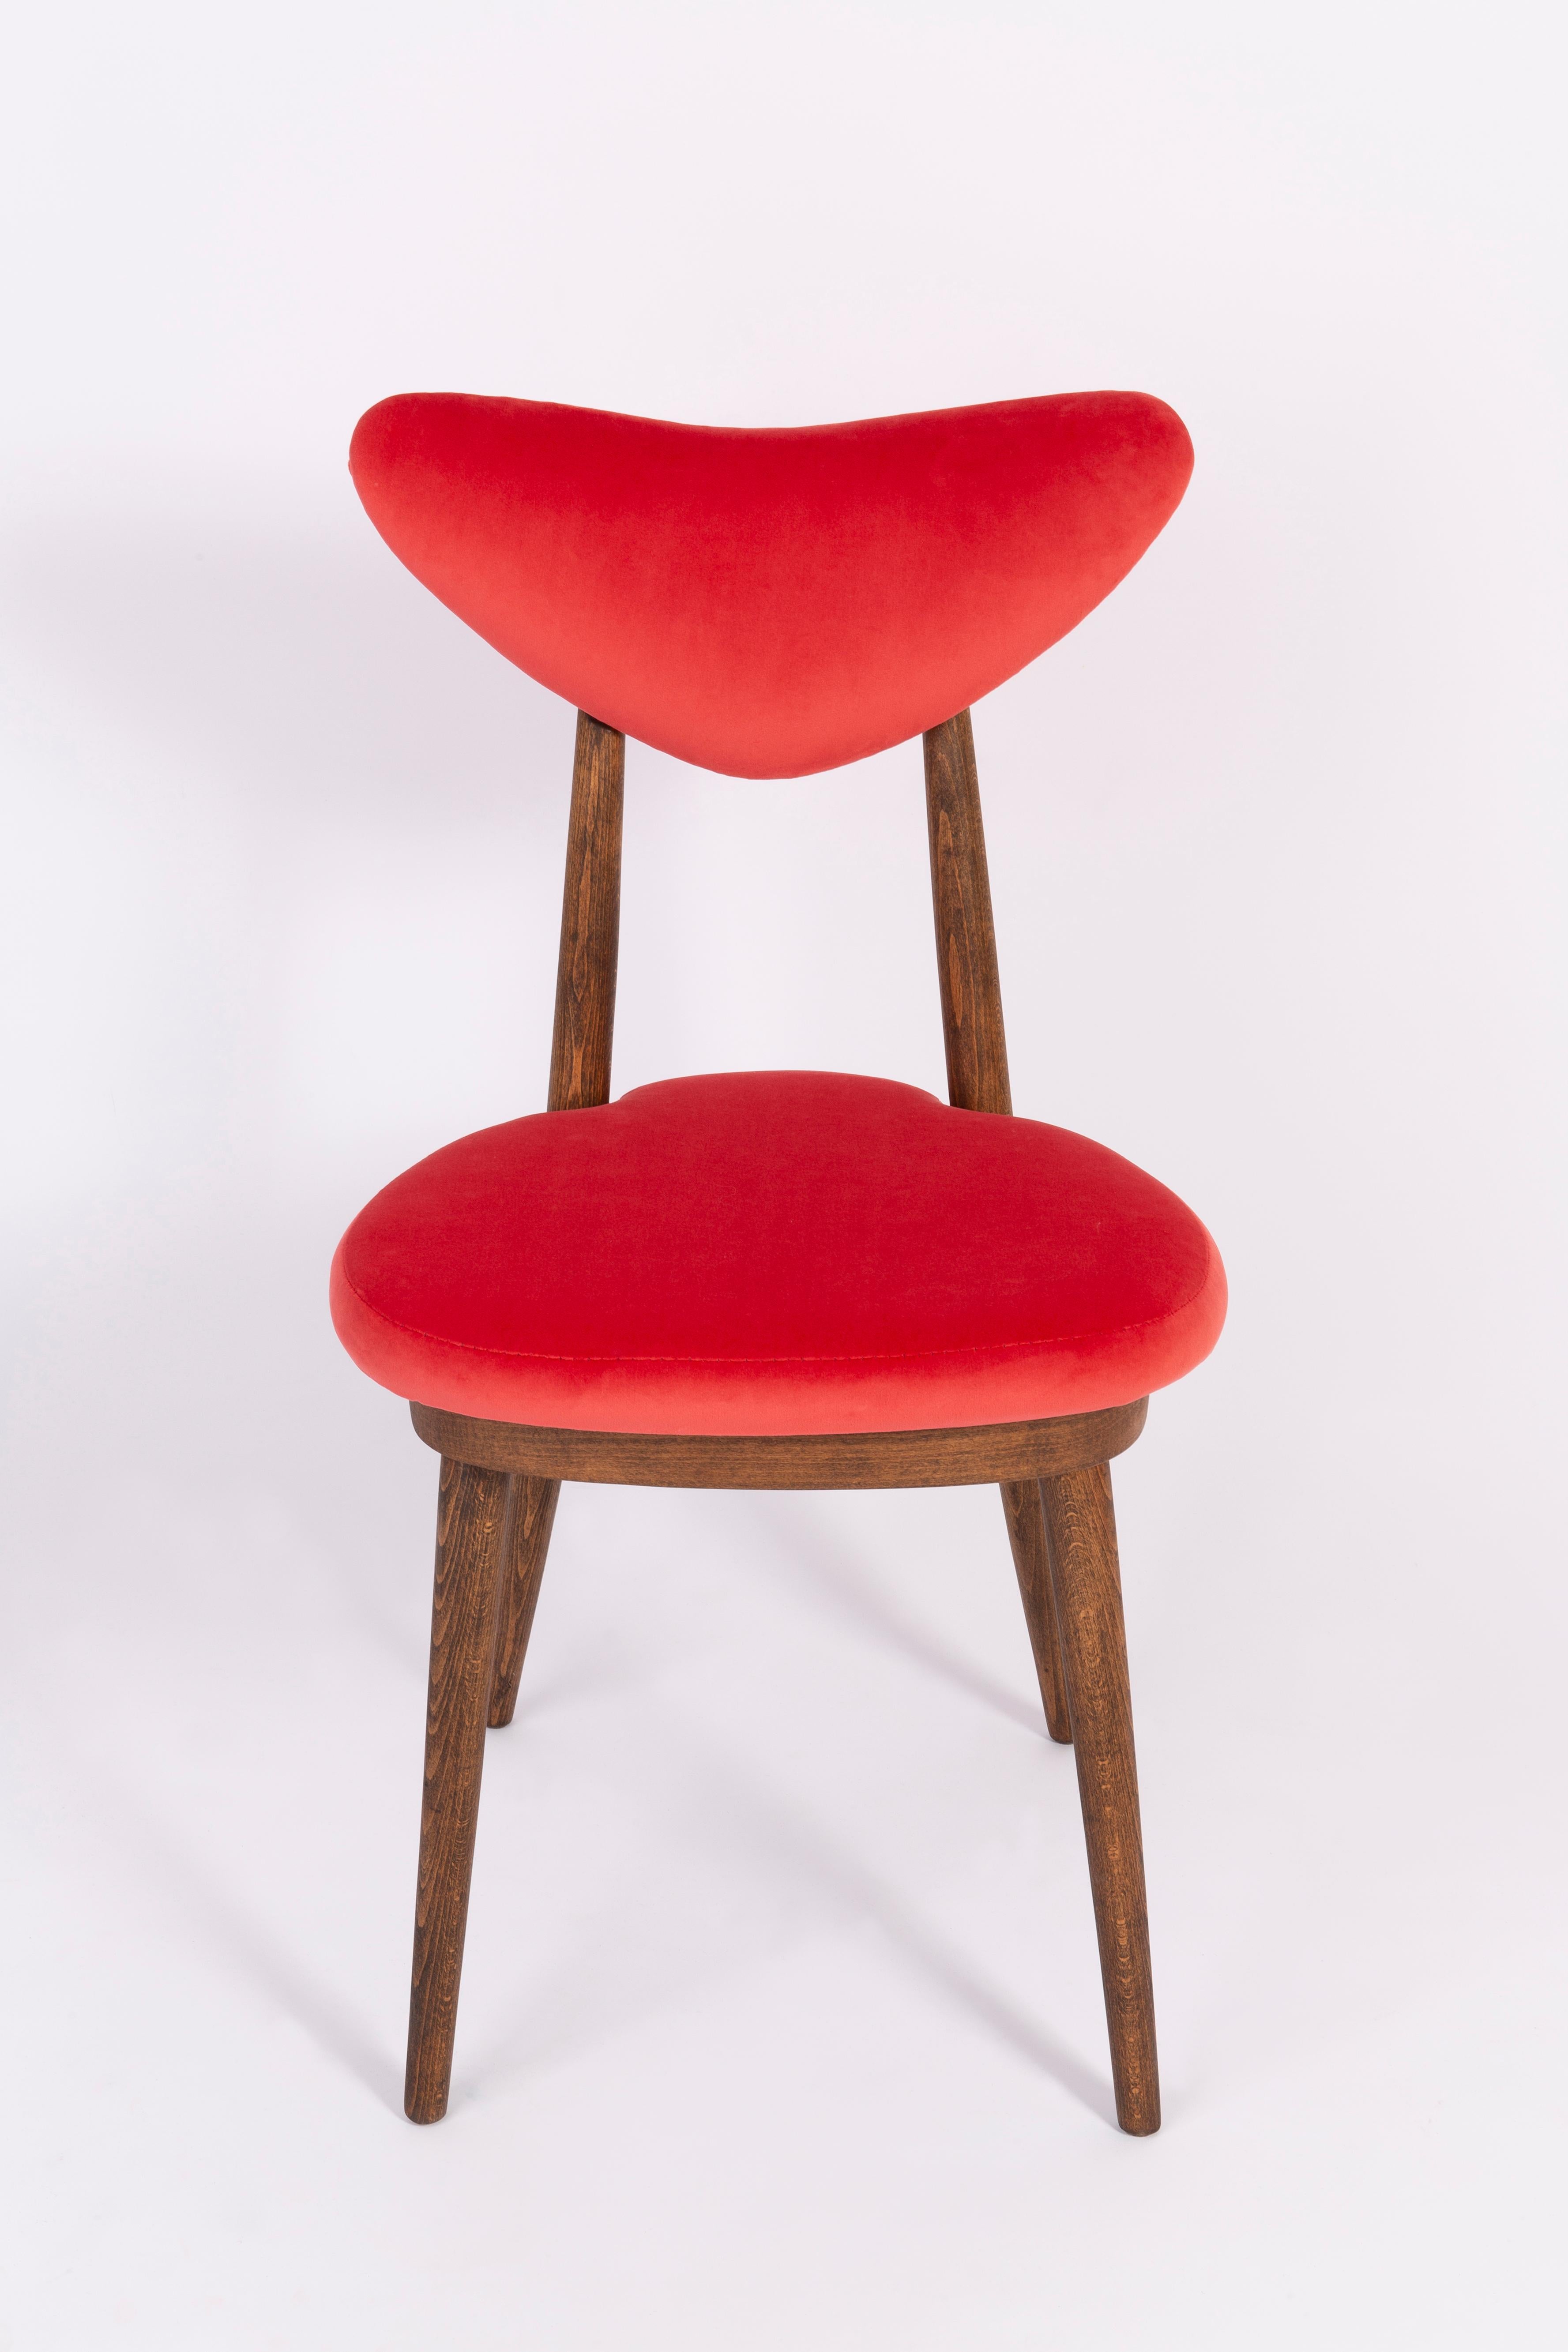 Pair of Red Heart Chairs, Poland, 1960s For Sale 5